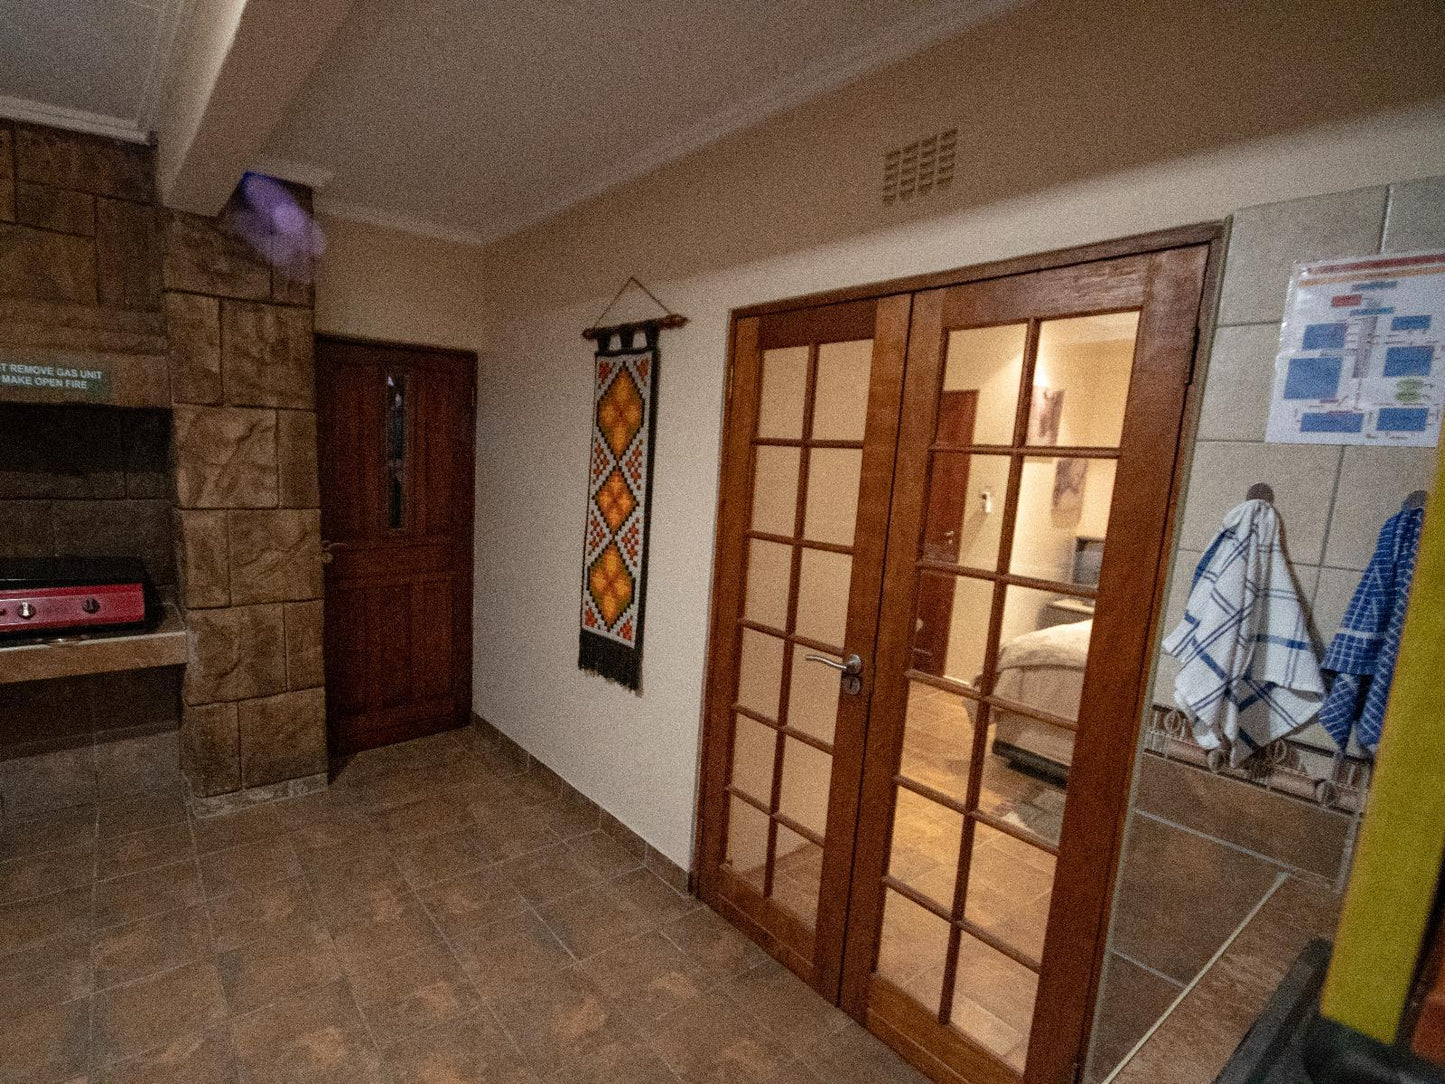 One-Bedroom Unit 4 @ Tipperary Game Lodge